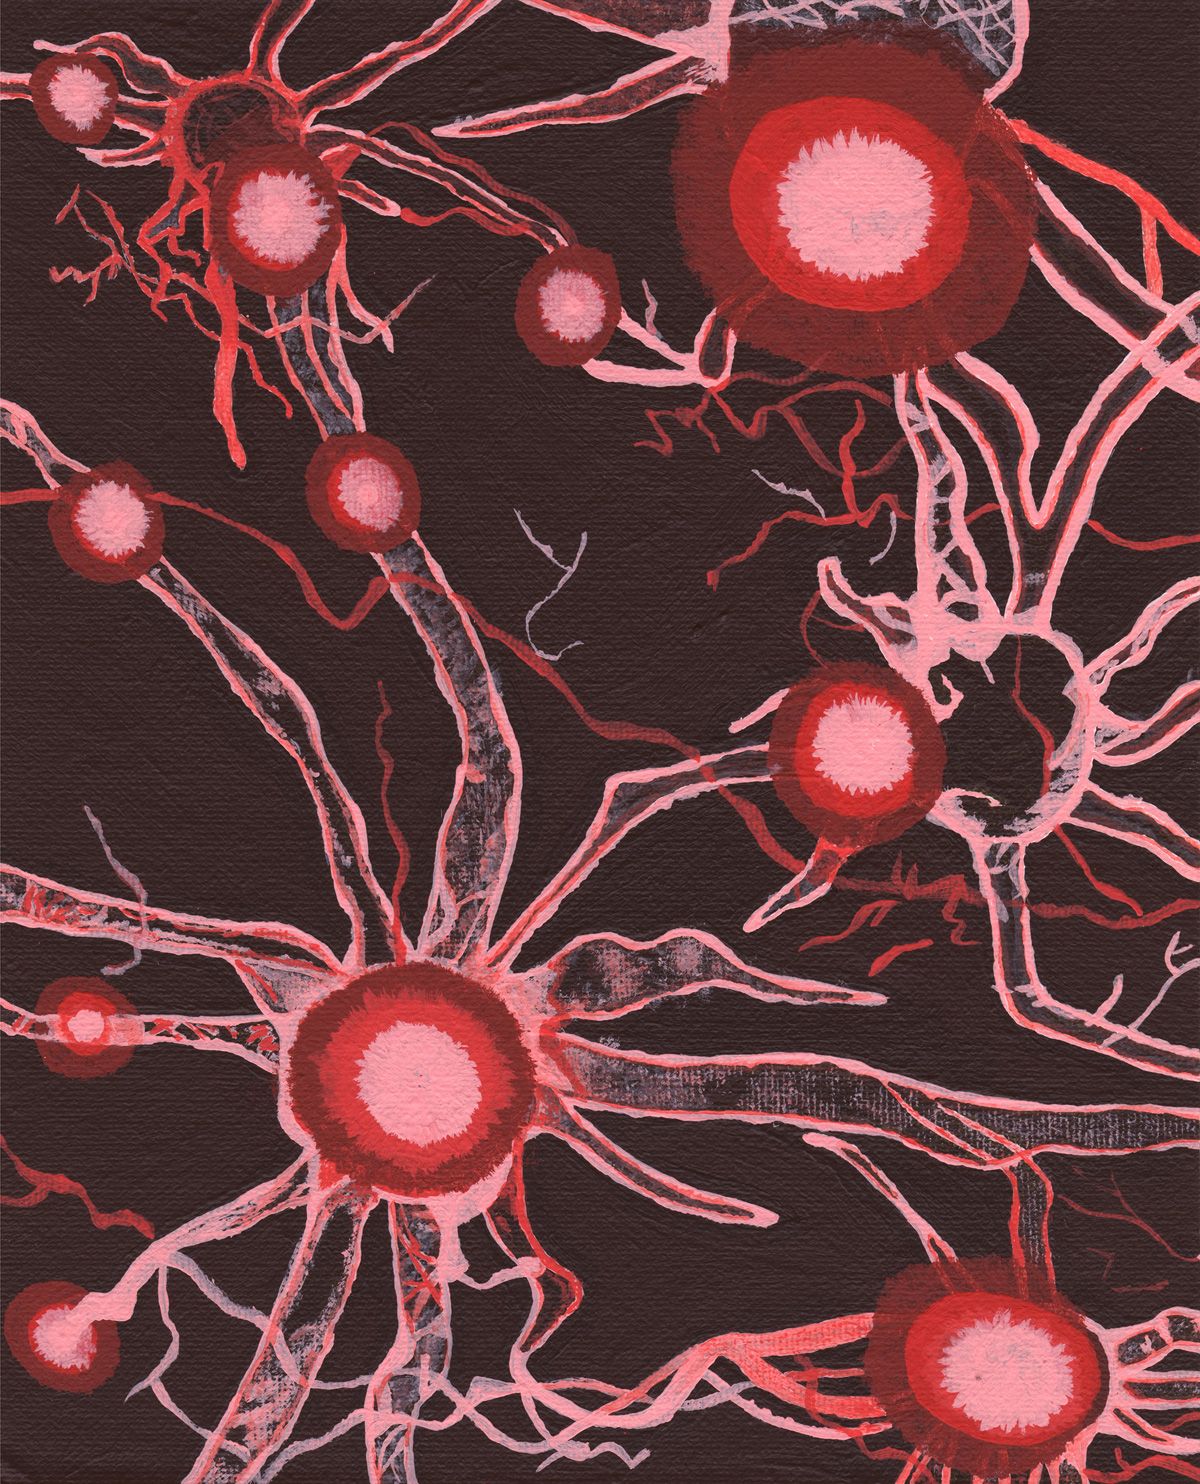 Kelsie Wiseman, "Nerve Cells" - 2015, Acrylic on Canvatex, 10 x 8 in.